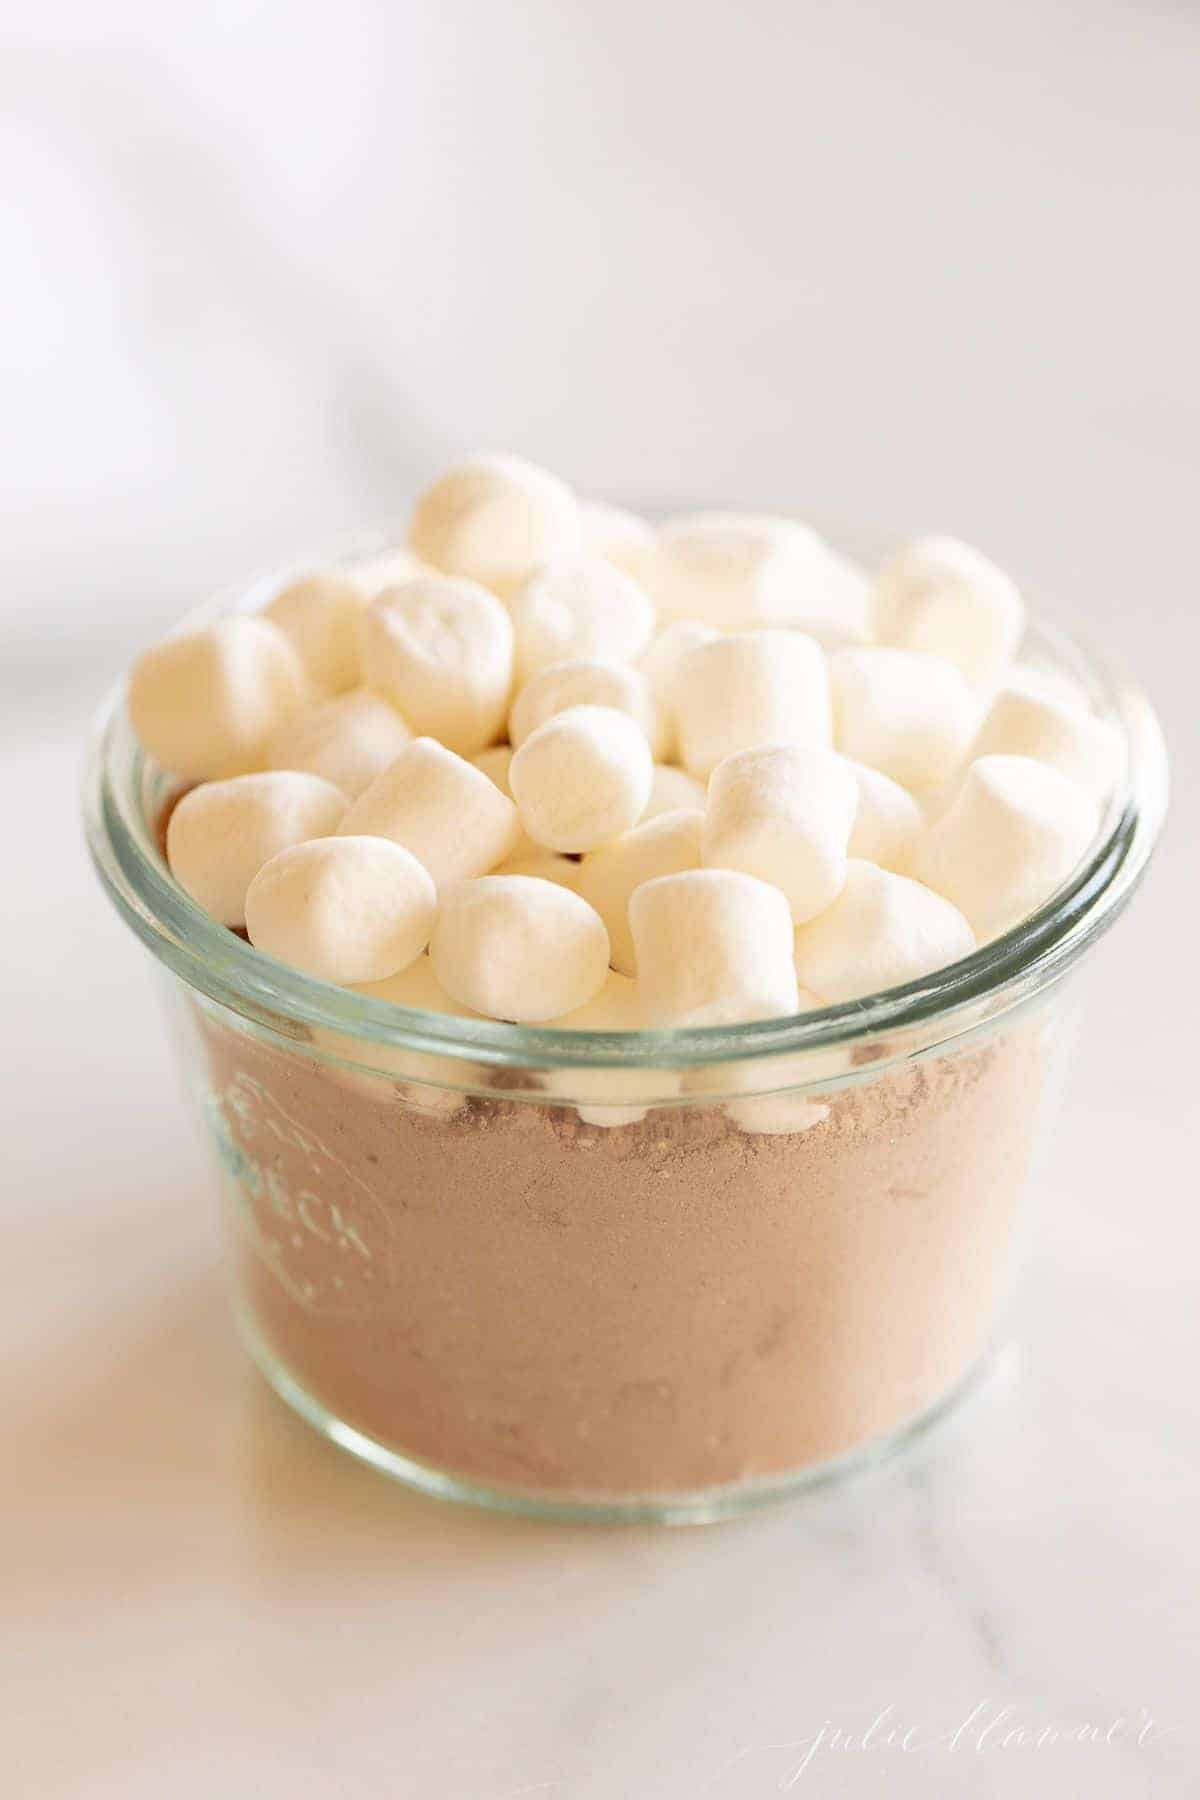 A small glass jar full of homemade hot chocolate mix topped with small marshmallows.